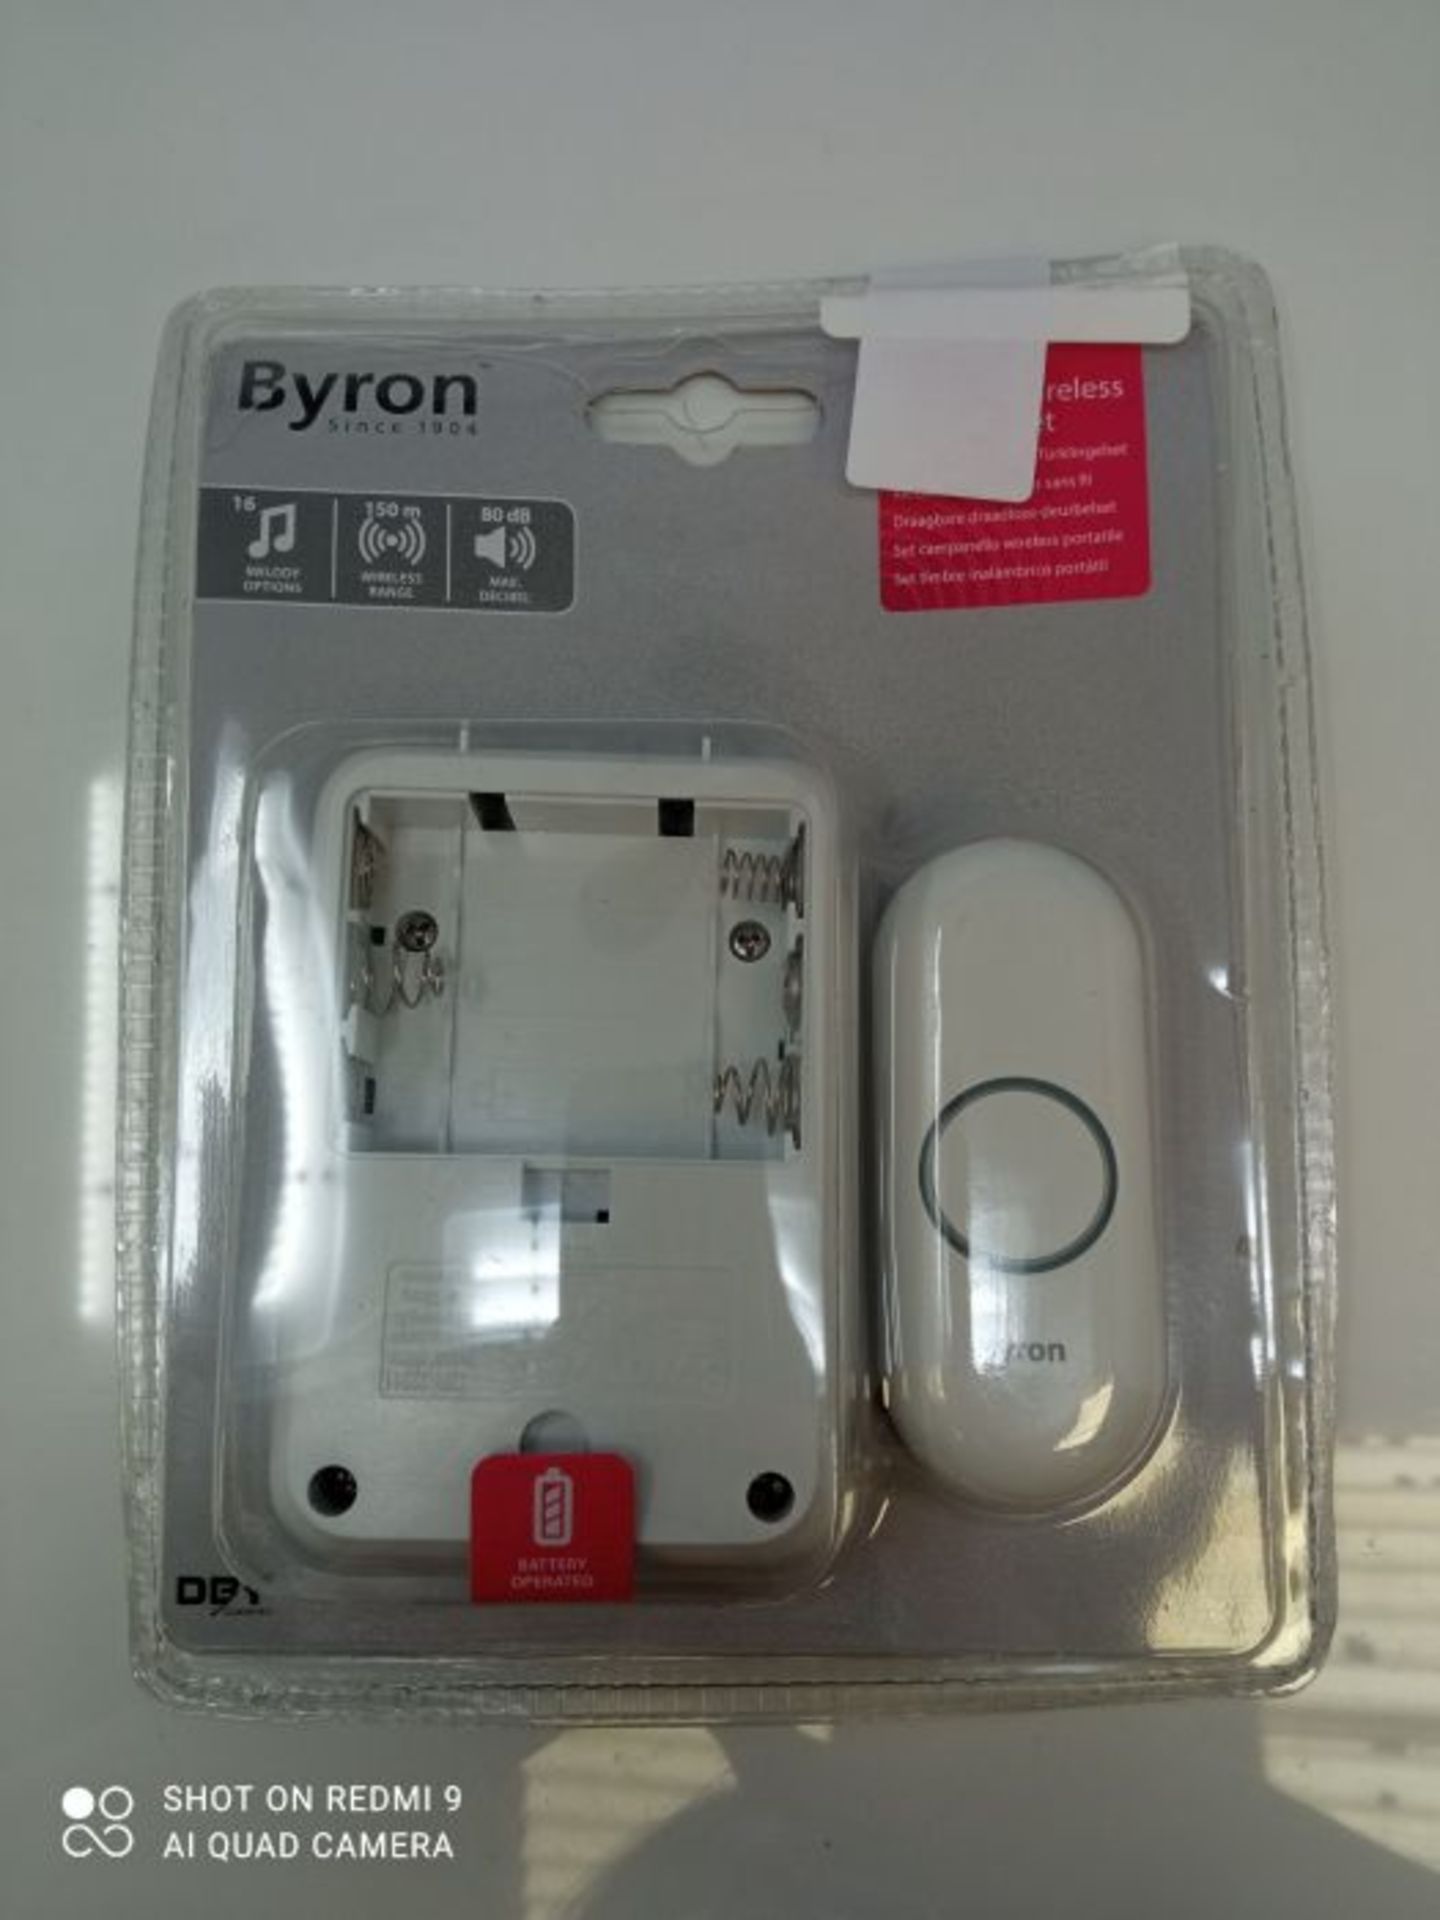 Byron DBY-22311 Wireless Portable Doorbell Set, 150 m Range, 16 Melodies - Image 2 of 3